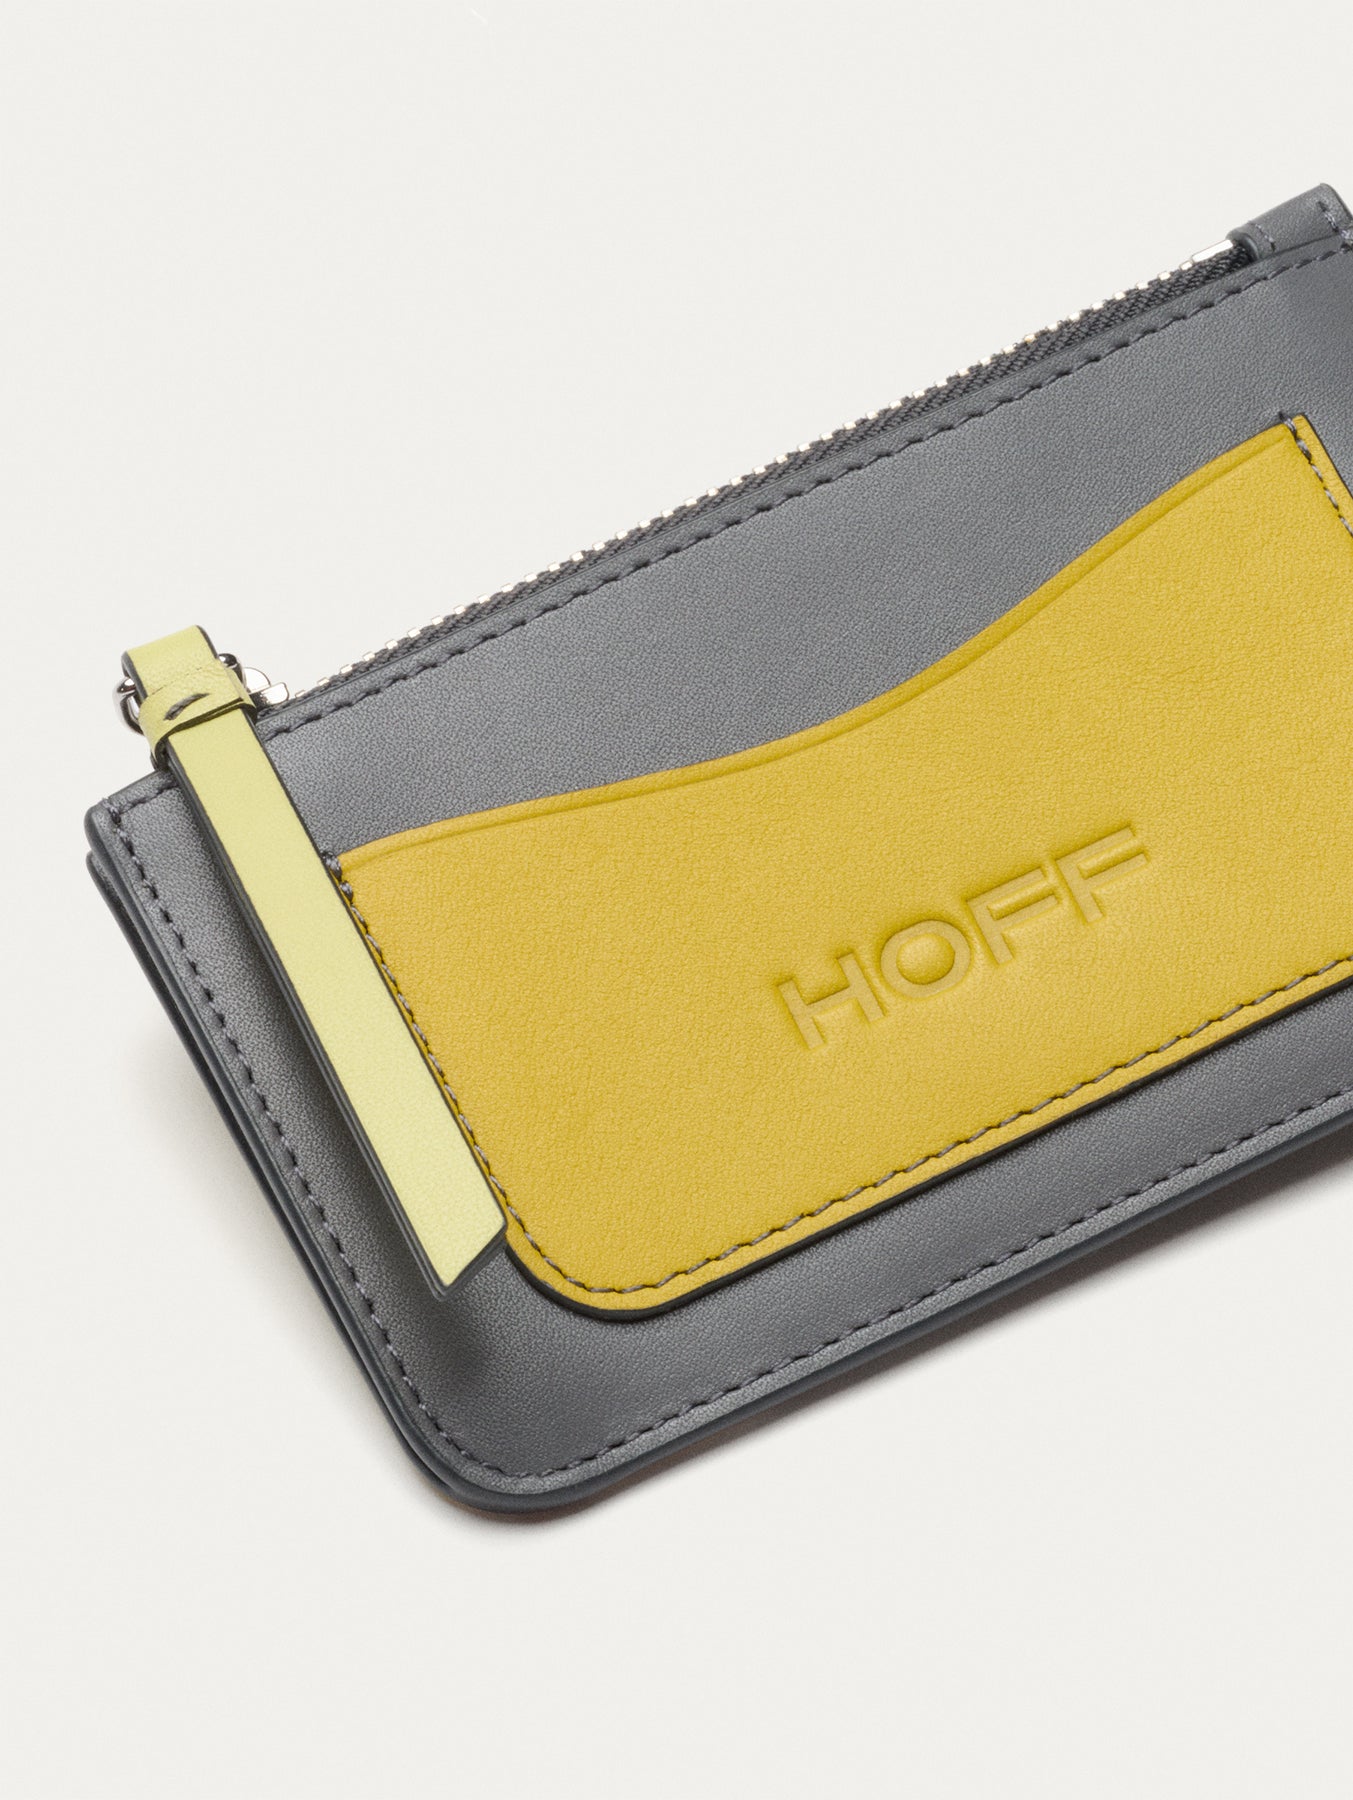 LEATHER GREY COIN CARDHOLDER 